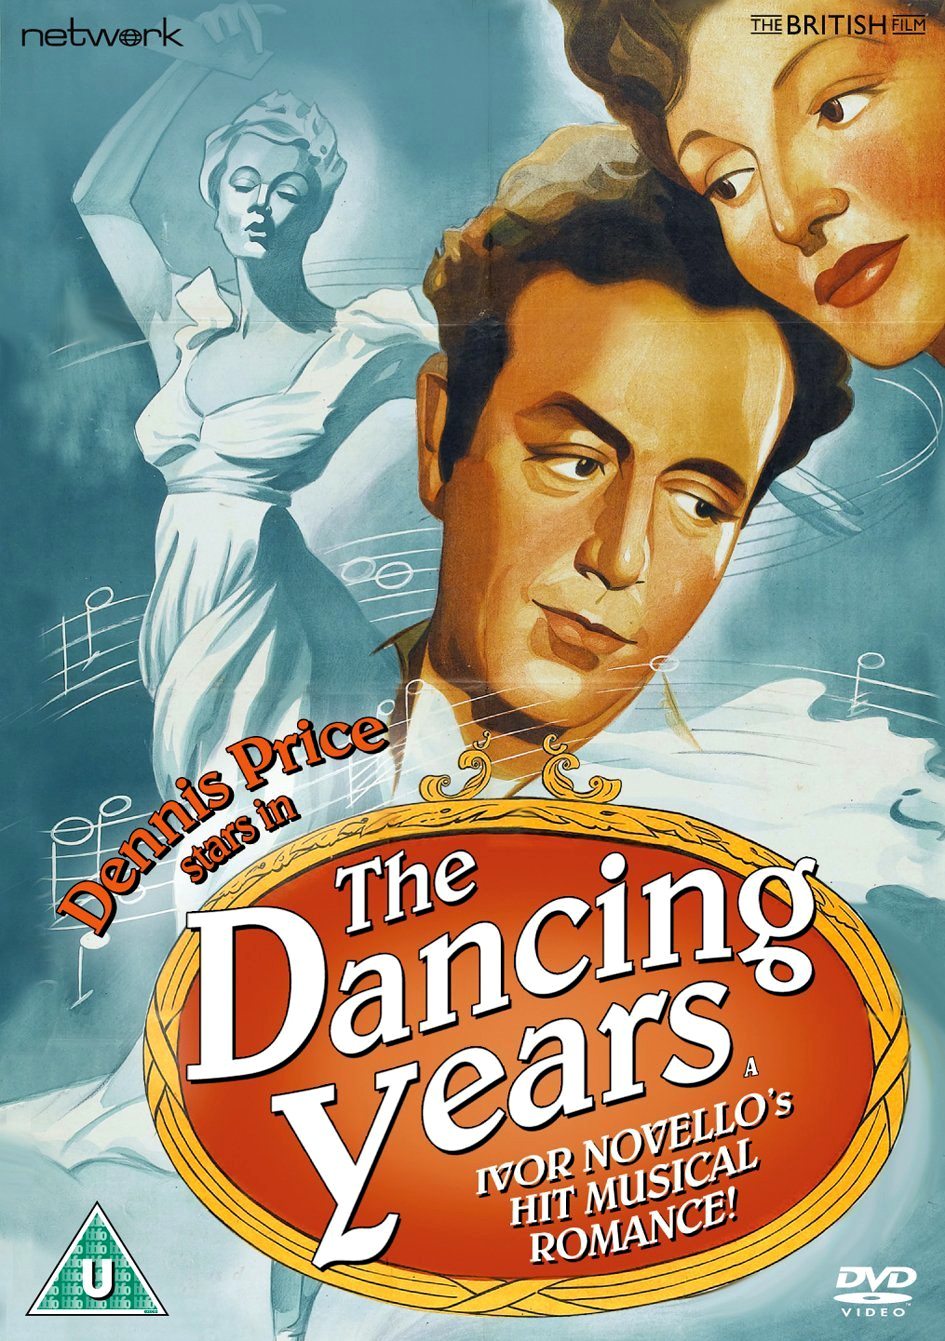 Dancing Years DVD from Network and The British Film